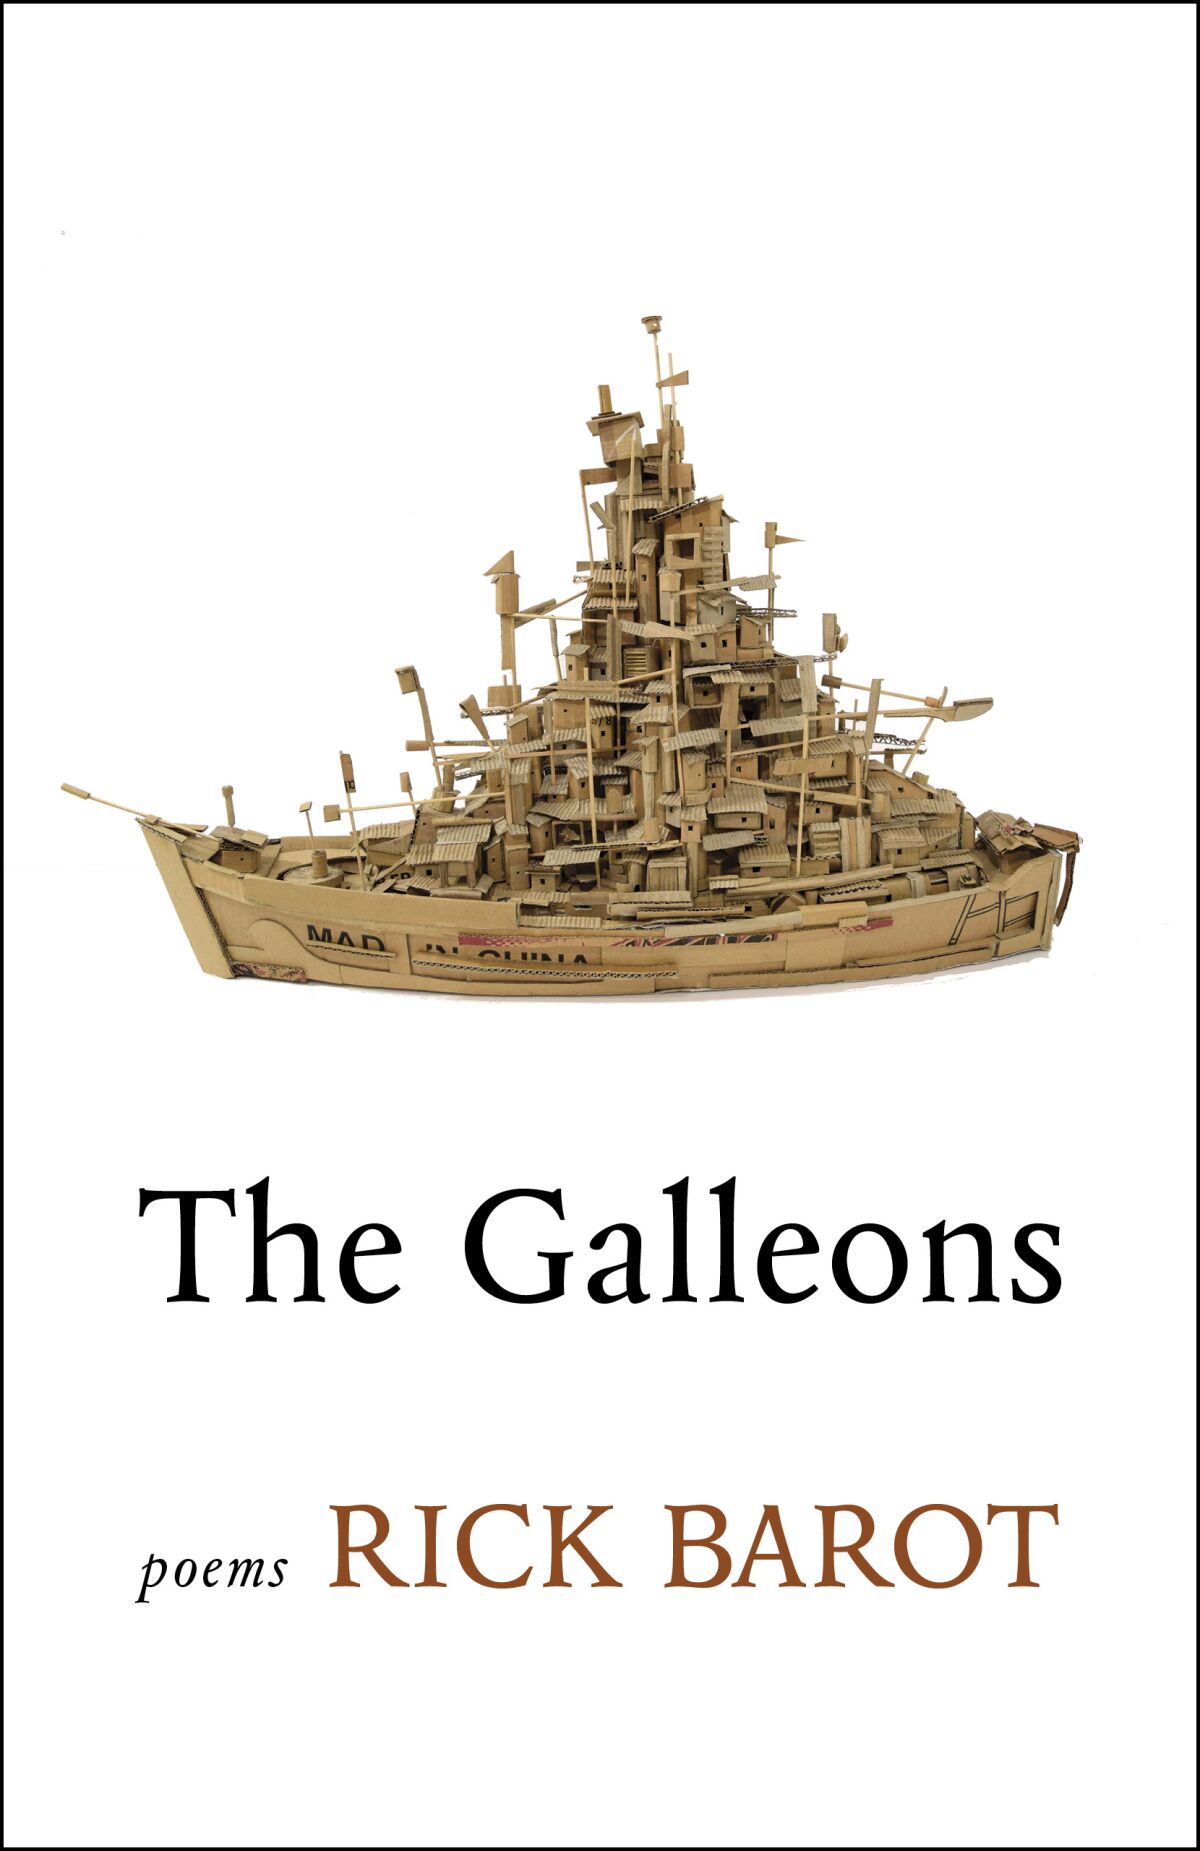 Cover of Rick Barot's poetry collection "The Galleons."